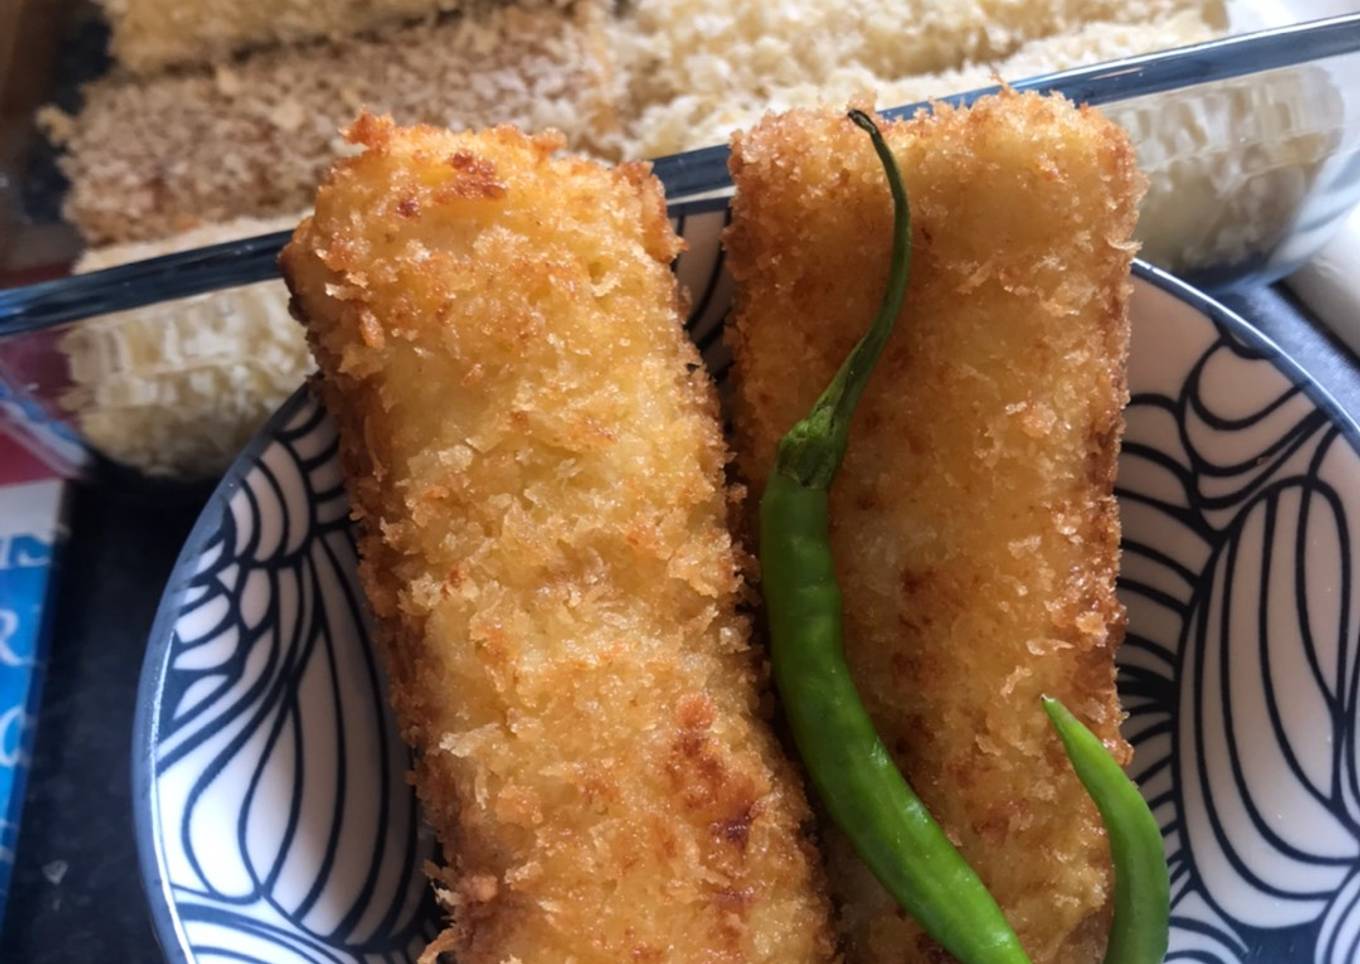 Risoles with chicken ragoet (creamy) filling - Indonesian Snack